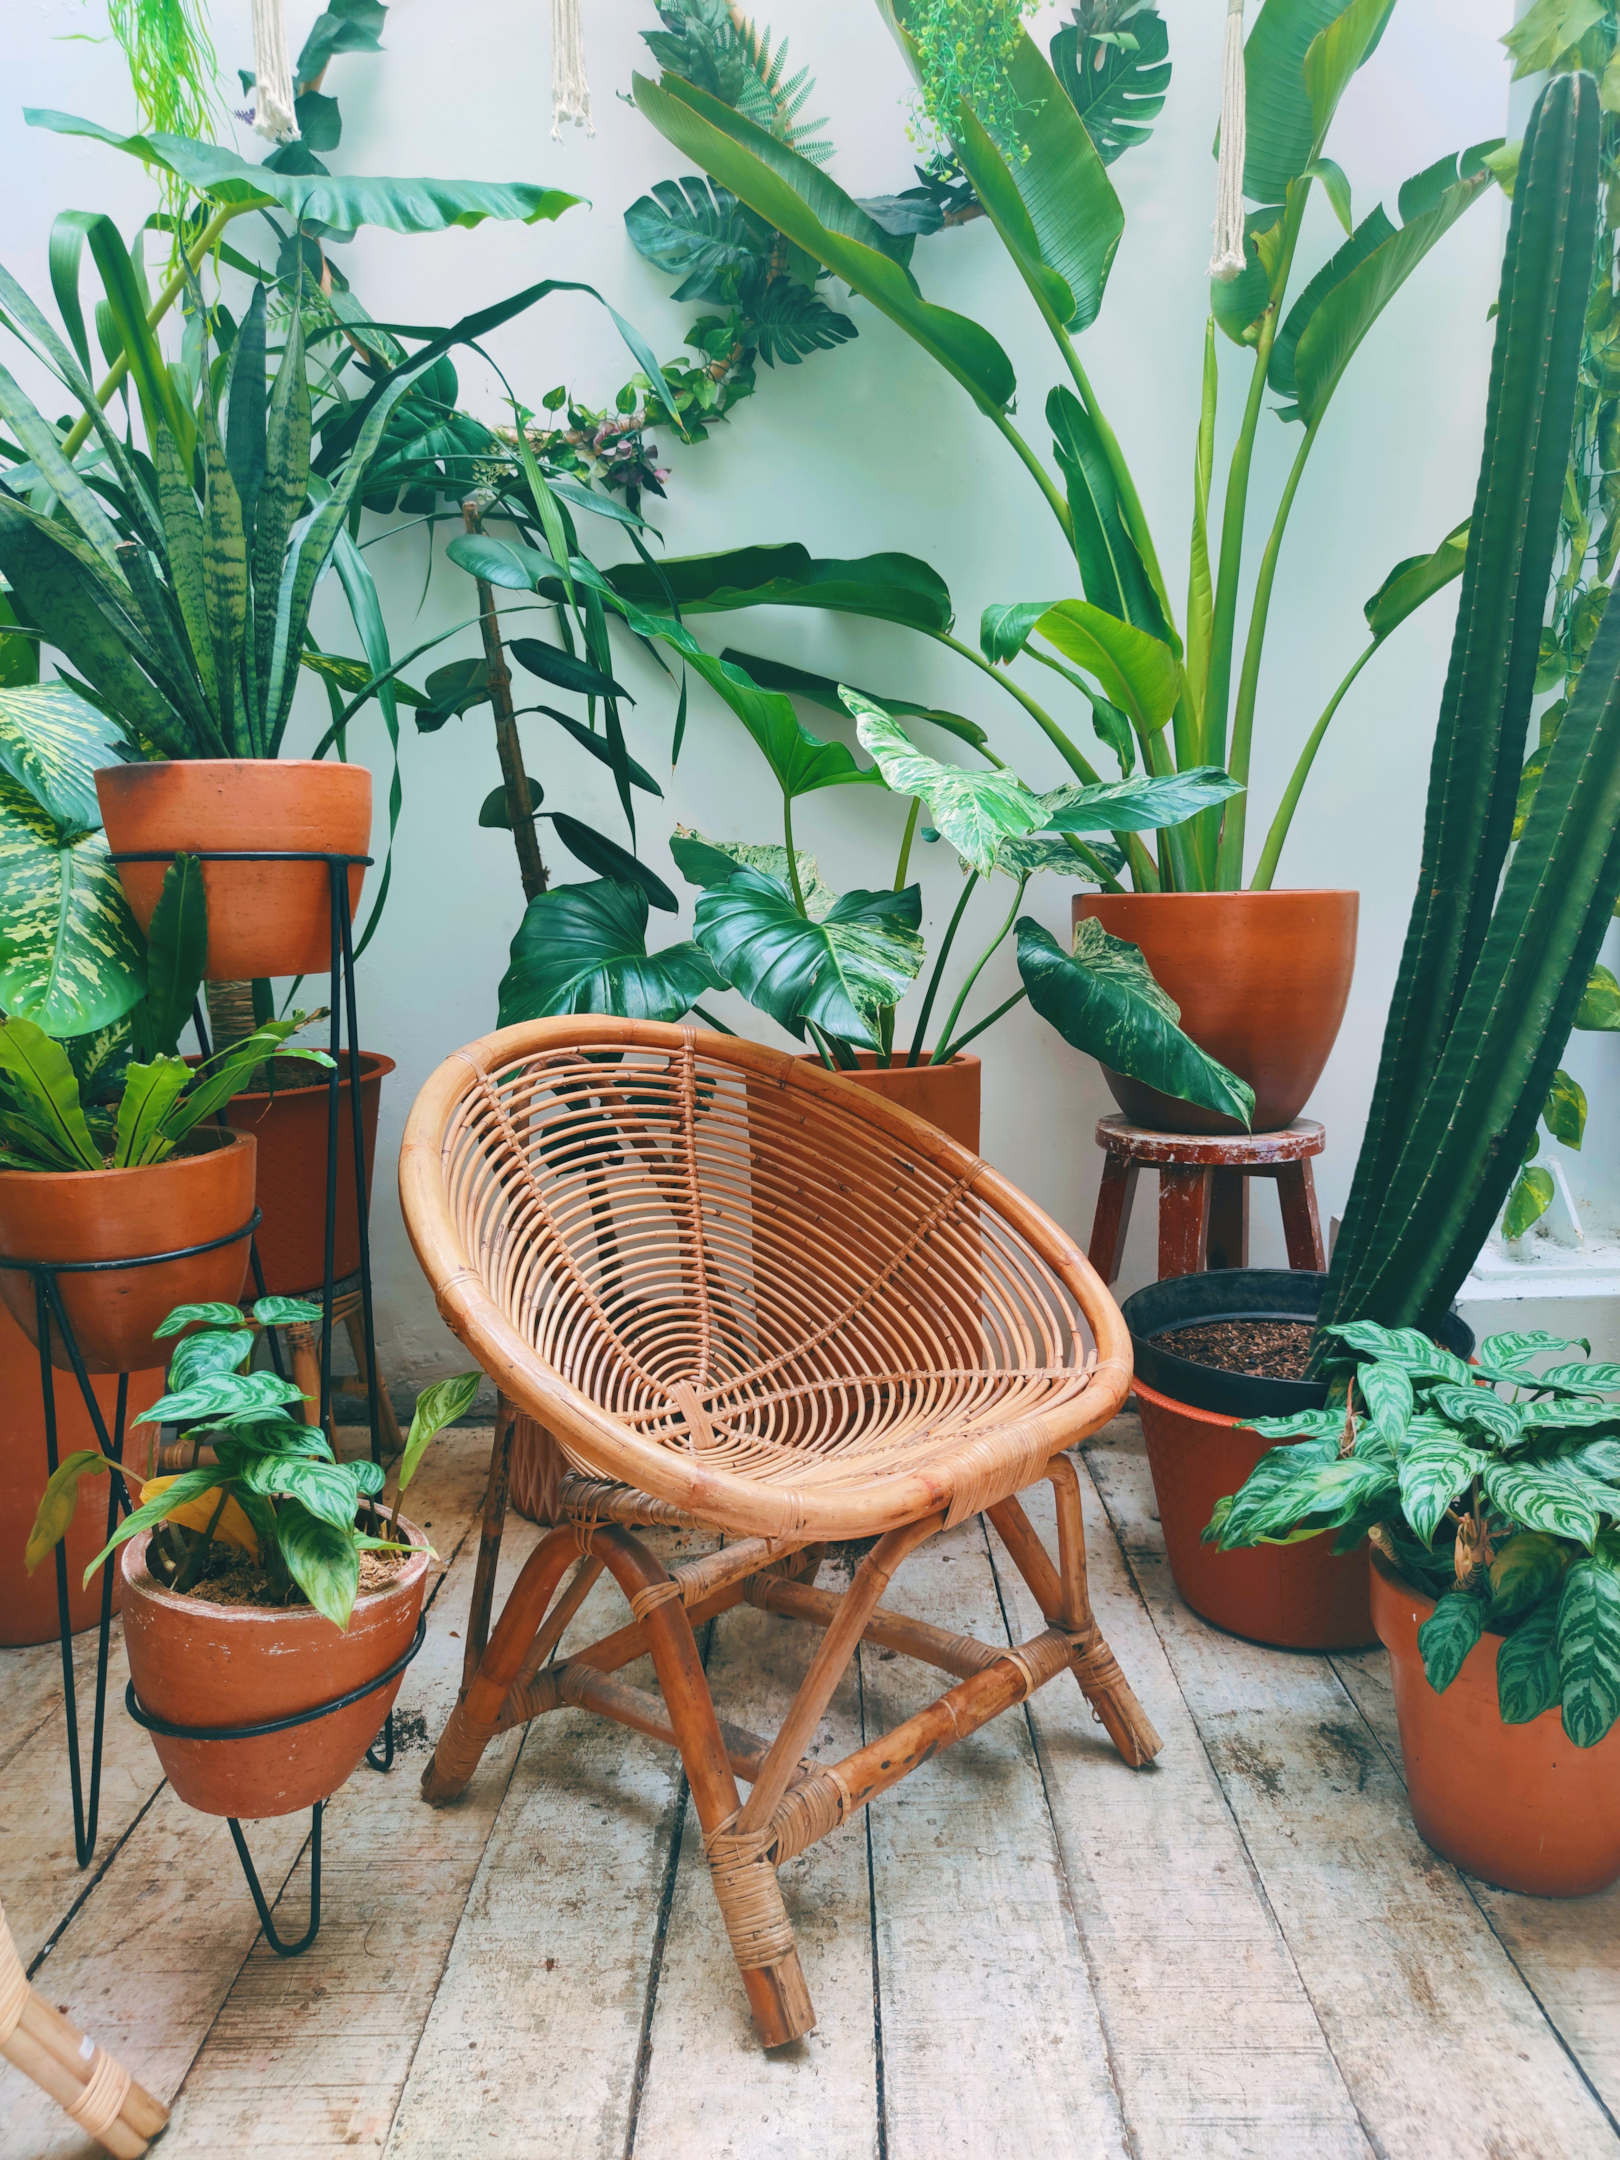 Balcony plants ensure cosiness and liveliness